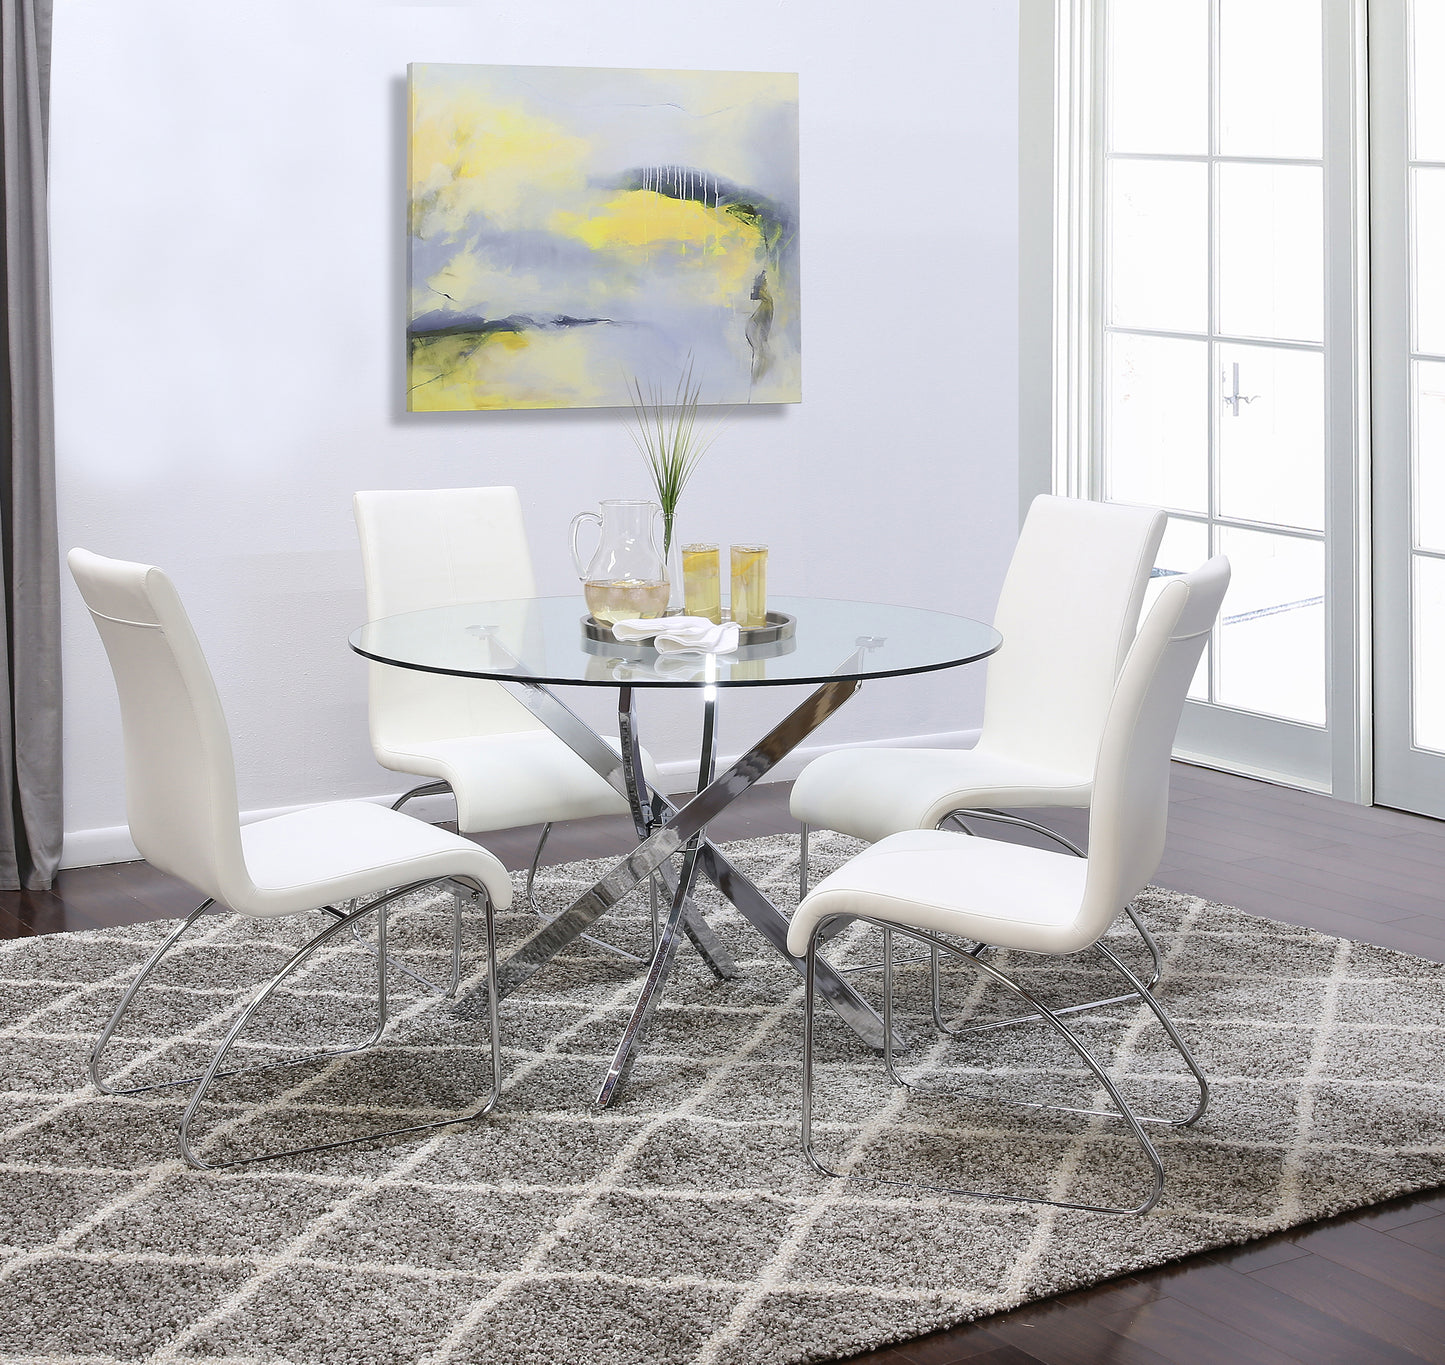 Lila 5 Piece Dining Set with White Chairs